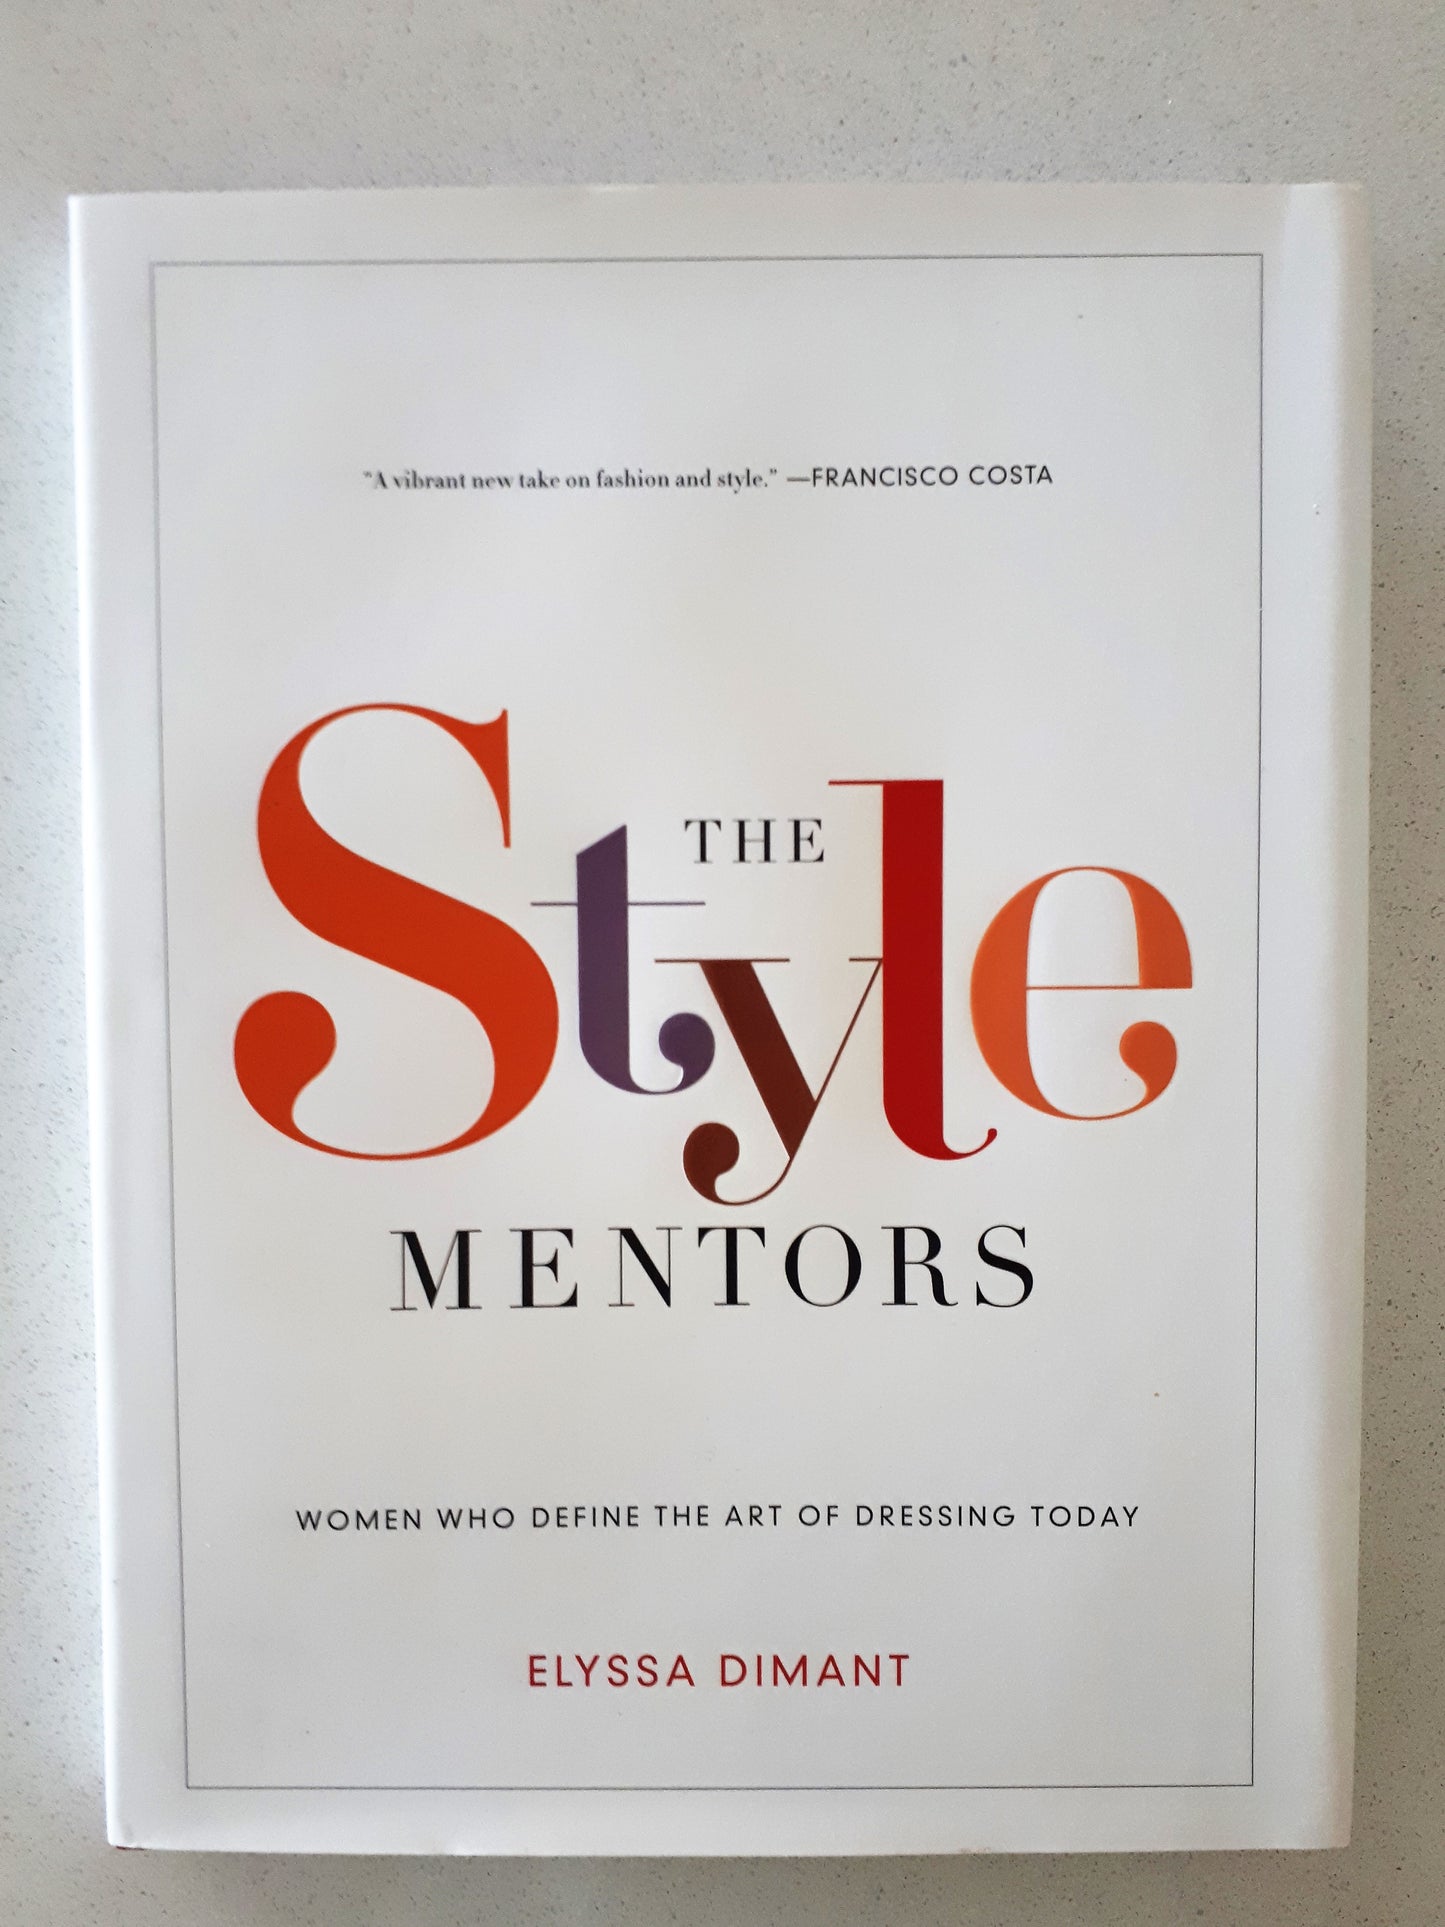 The Style Mentors -   Women Who Define The Art Of Dressing Today  by Elyssa Dimant 